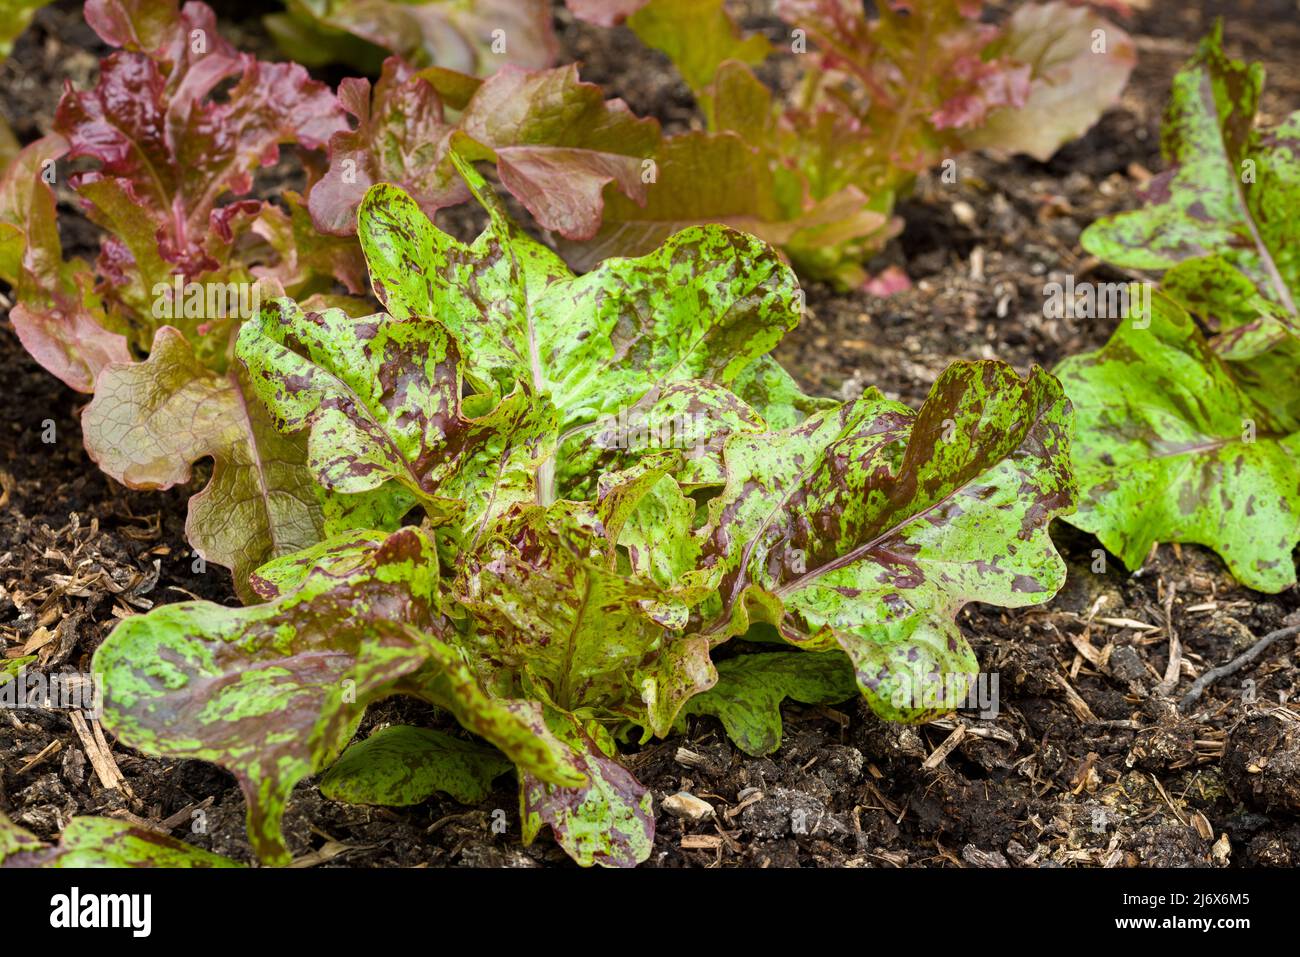 A young Flashy Butter Oak lettuce plant growing in a no-dig style vegetable garden in spring. Stock Photo